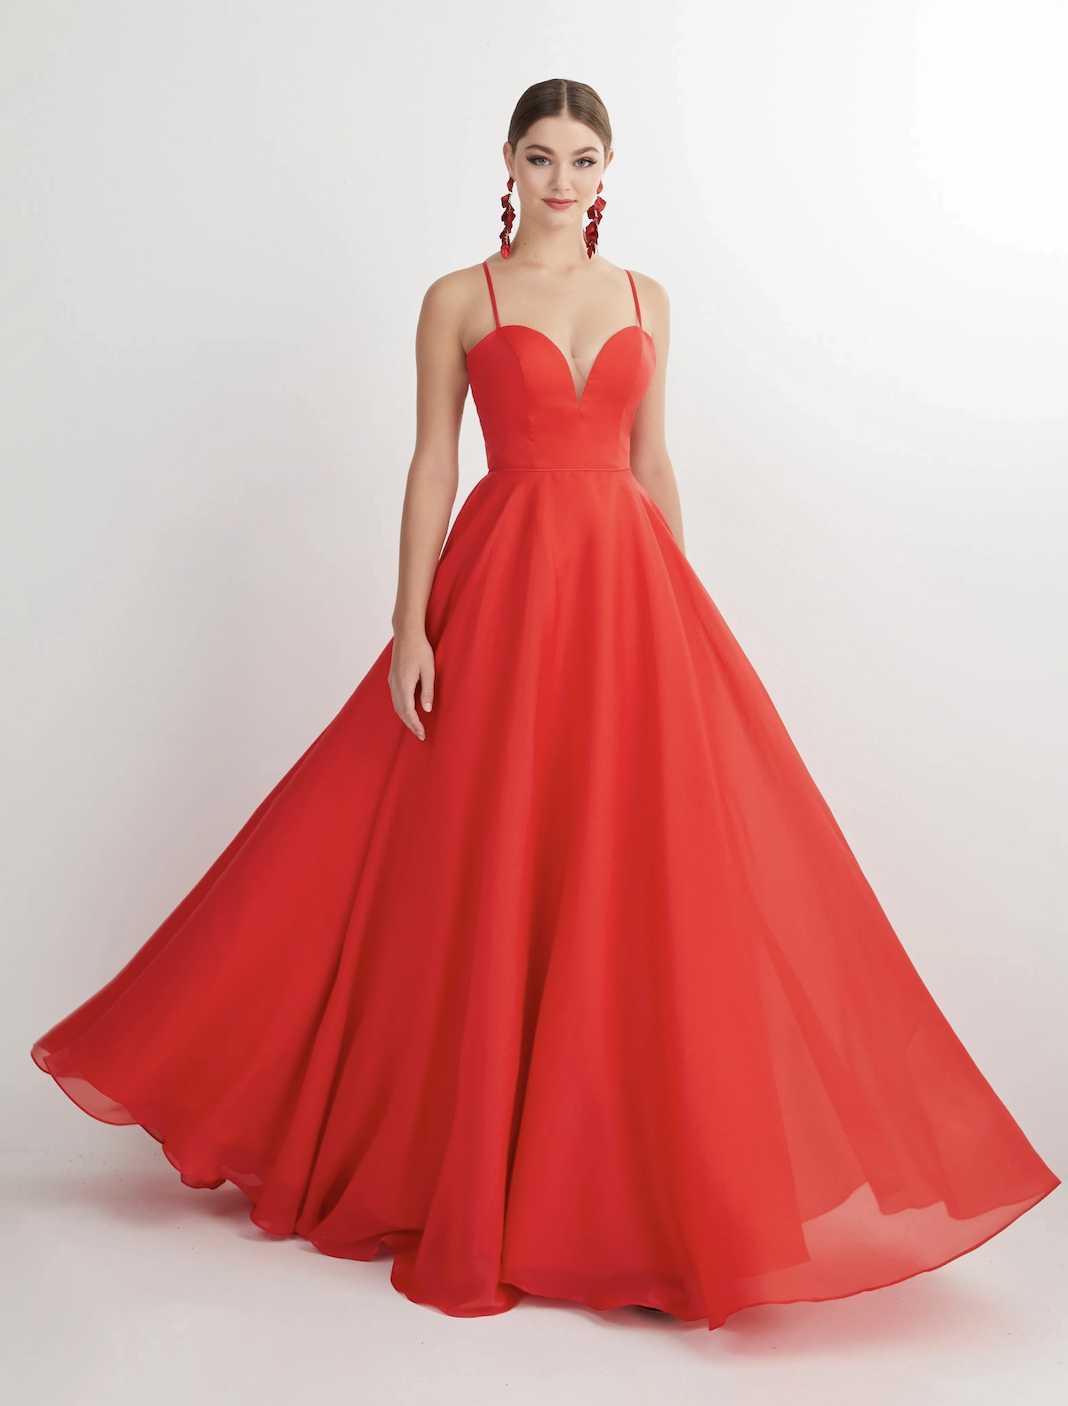 Hottest Red Prom Dresses Image